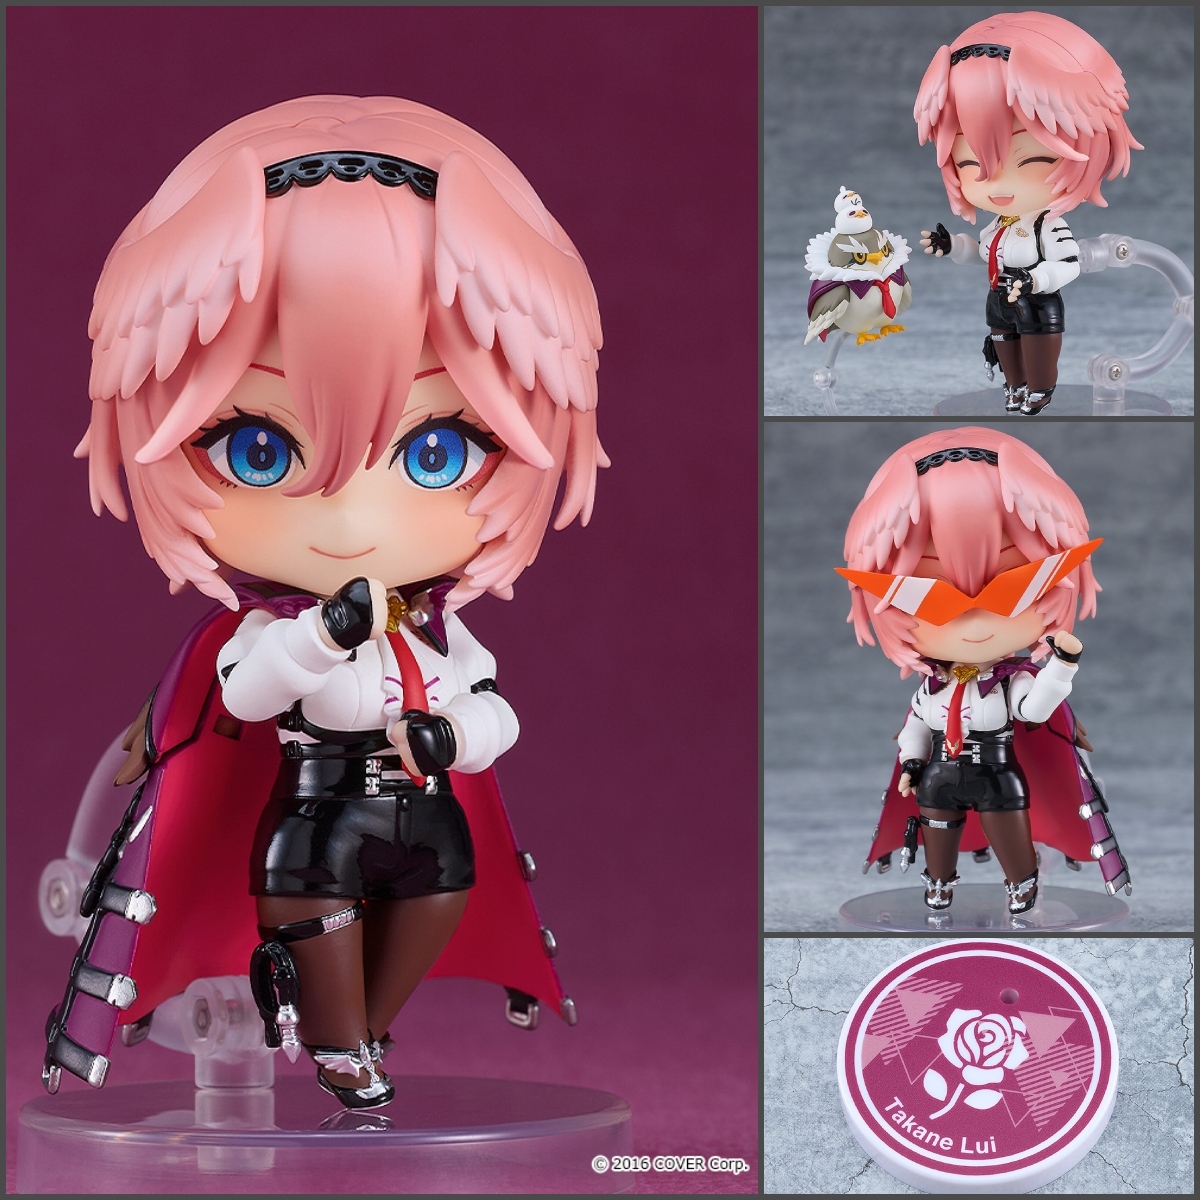 From the popular VTuber group 'hololive production' comes a Nendoroid of Takane Lui, an executive of Secret Society holoX! Don't Luive her waiting and preorder her today! Shop: s.goodsmile.link/hU3 #Hololive #Goodsmile